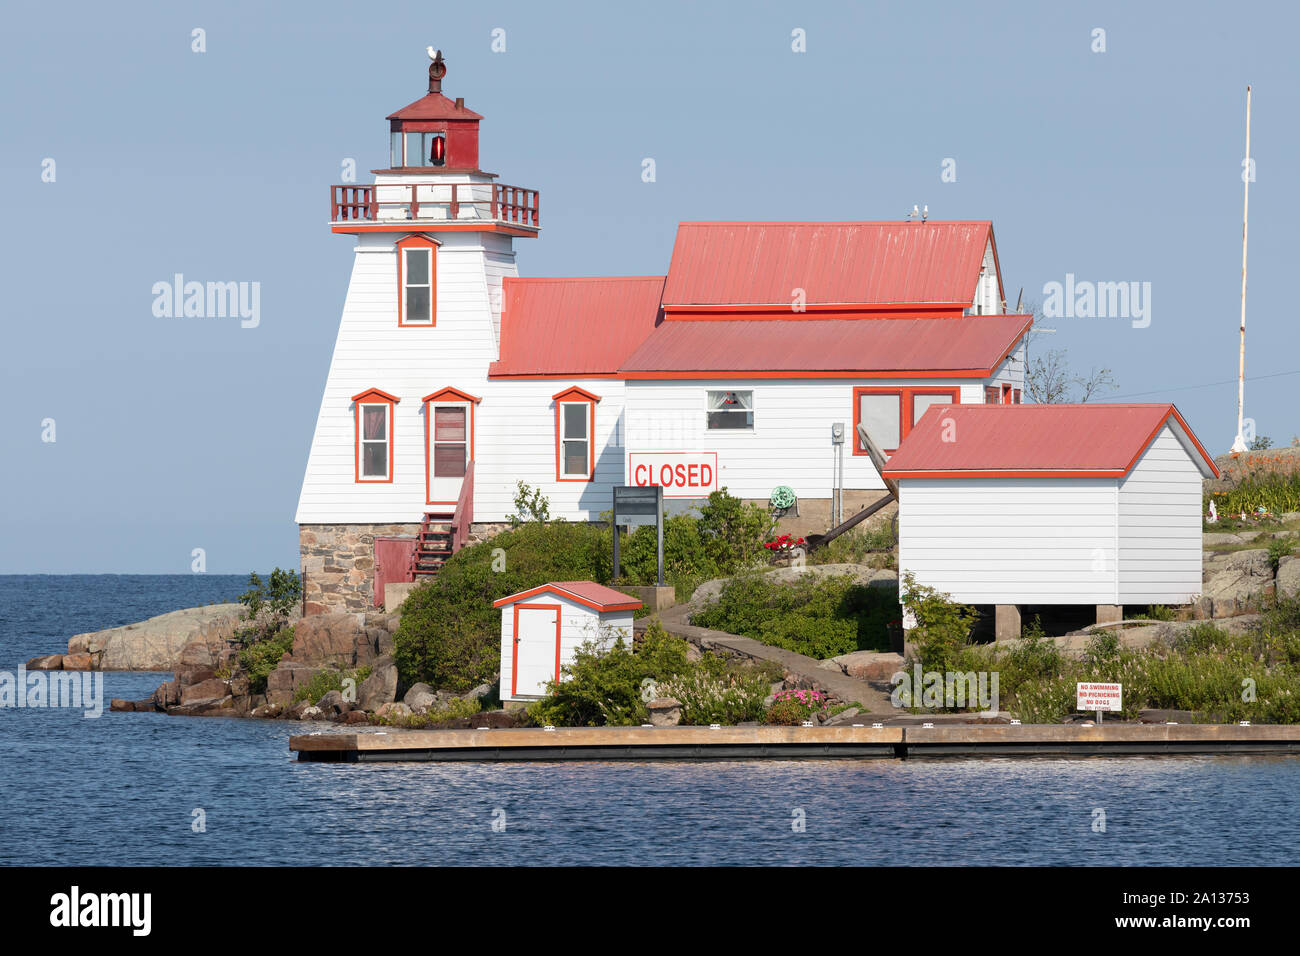 Pointe au Baril gamme phare avant, Ontario, Canada Banque D'Images